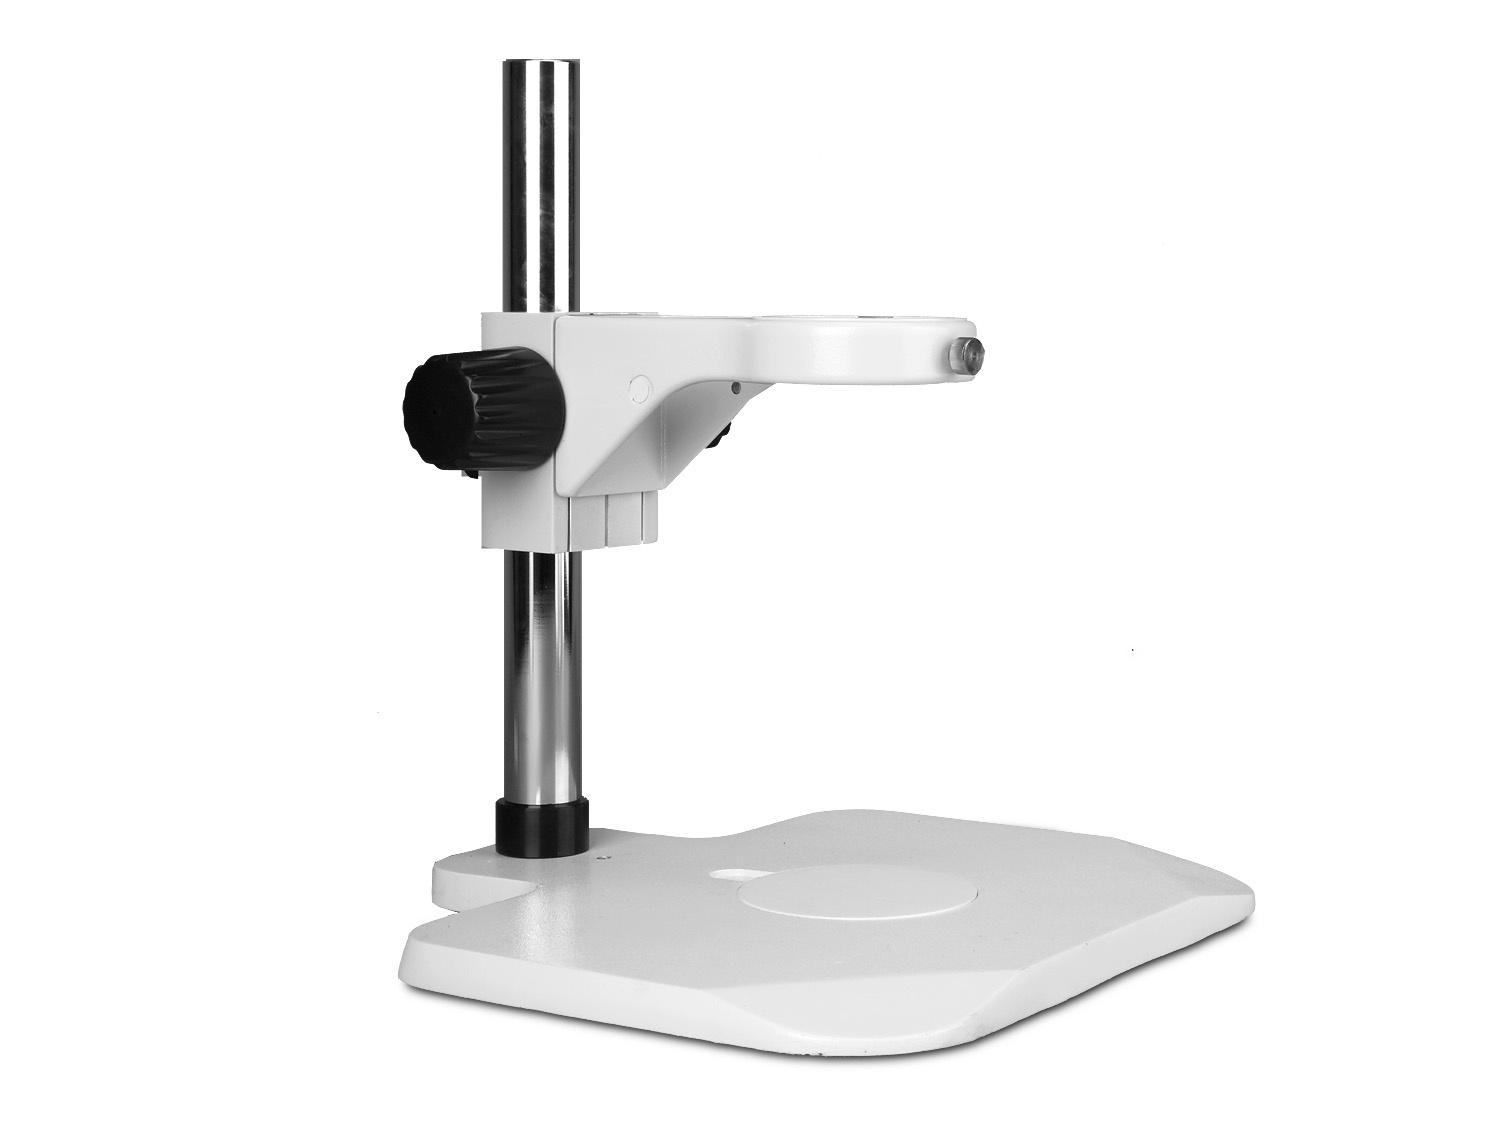 Scienscope SP-76-LG Ergo Large Base Post Stand with Focus Mount